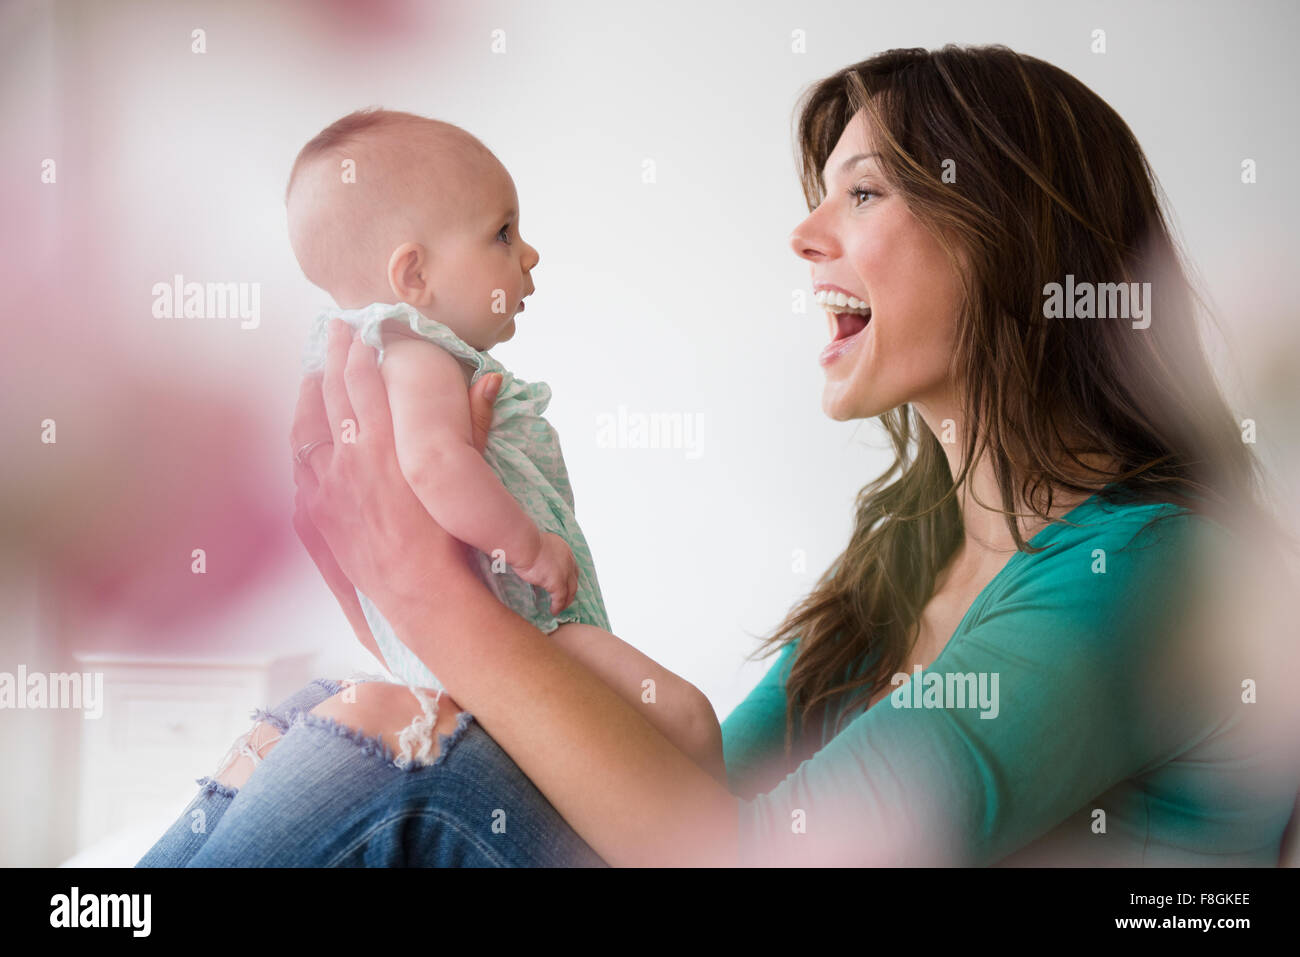 Mother holding baby daughter Stock Photo